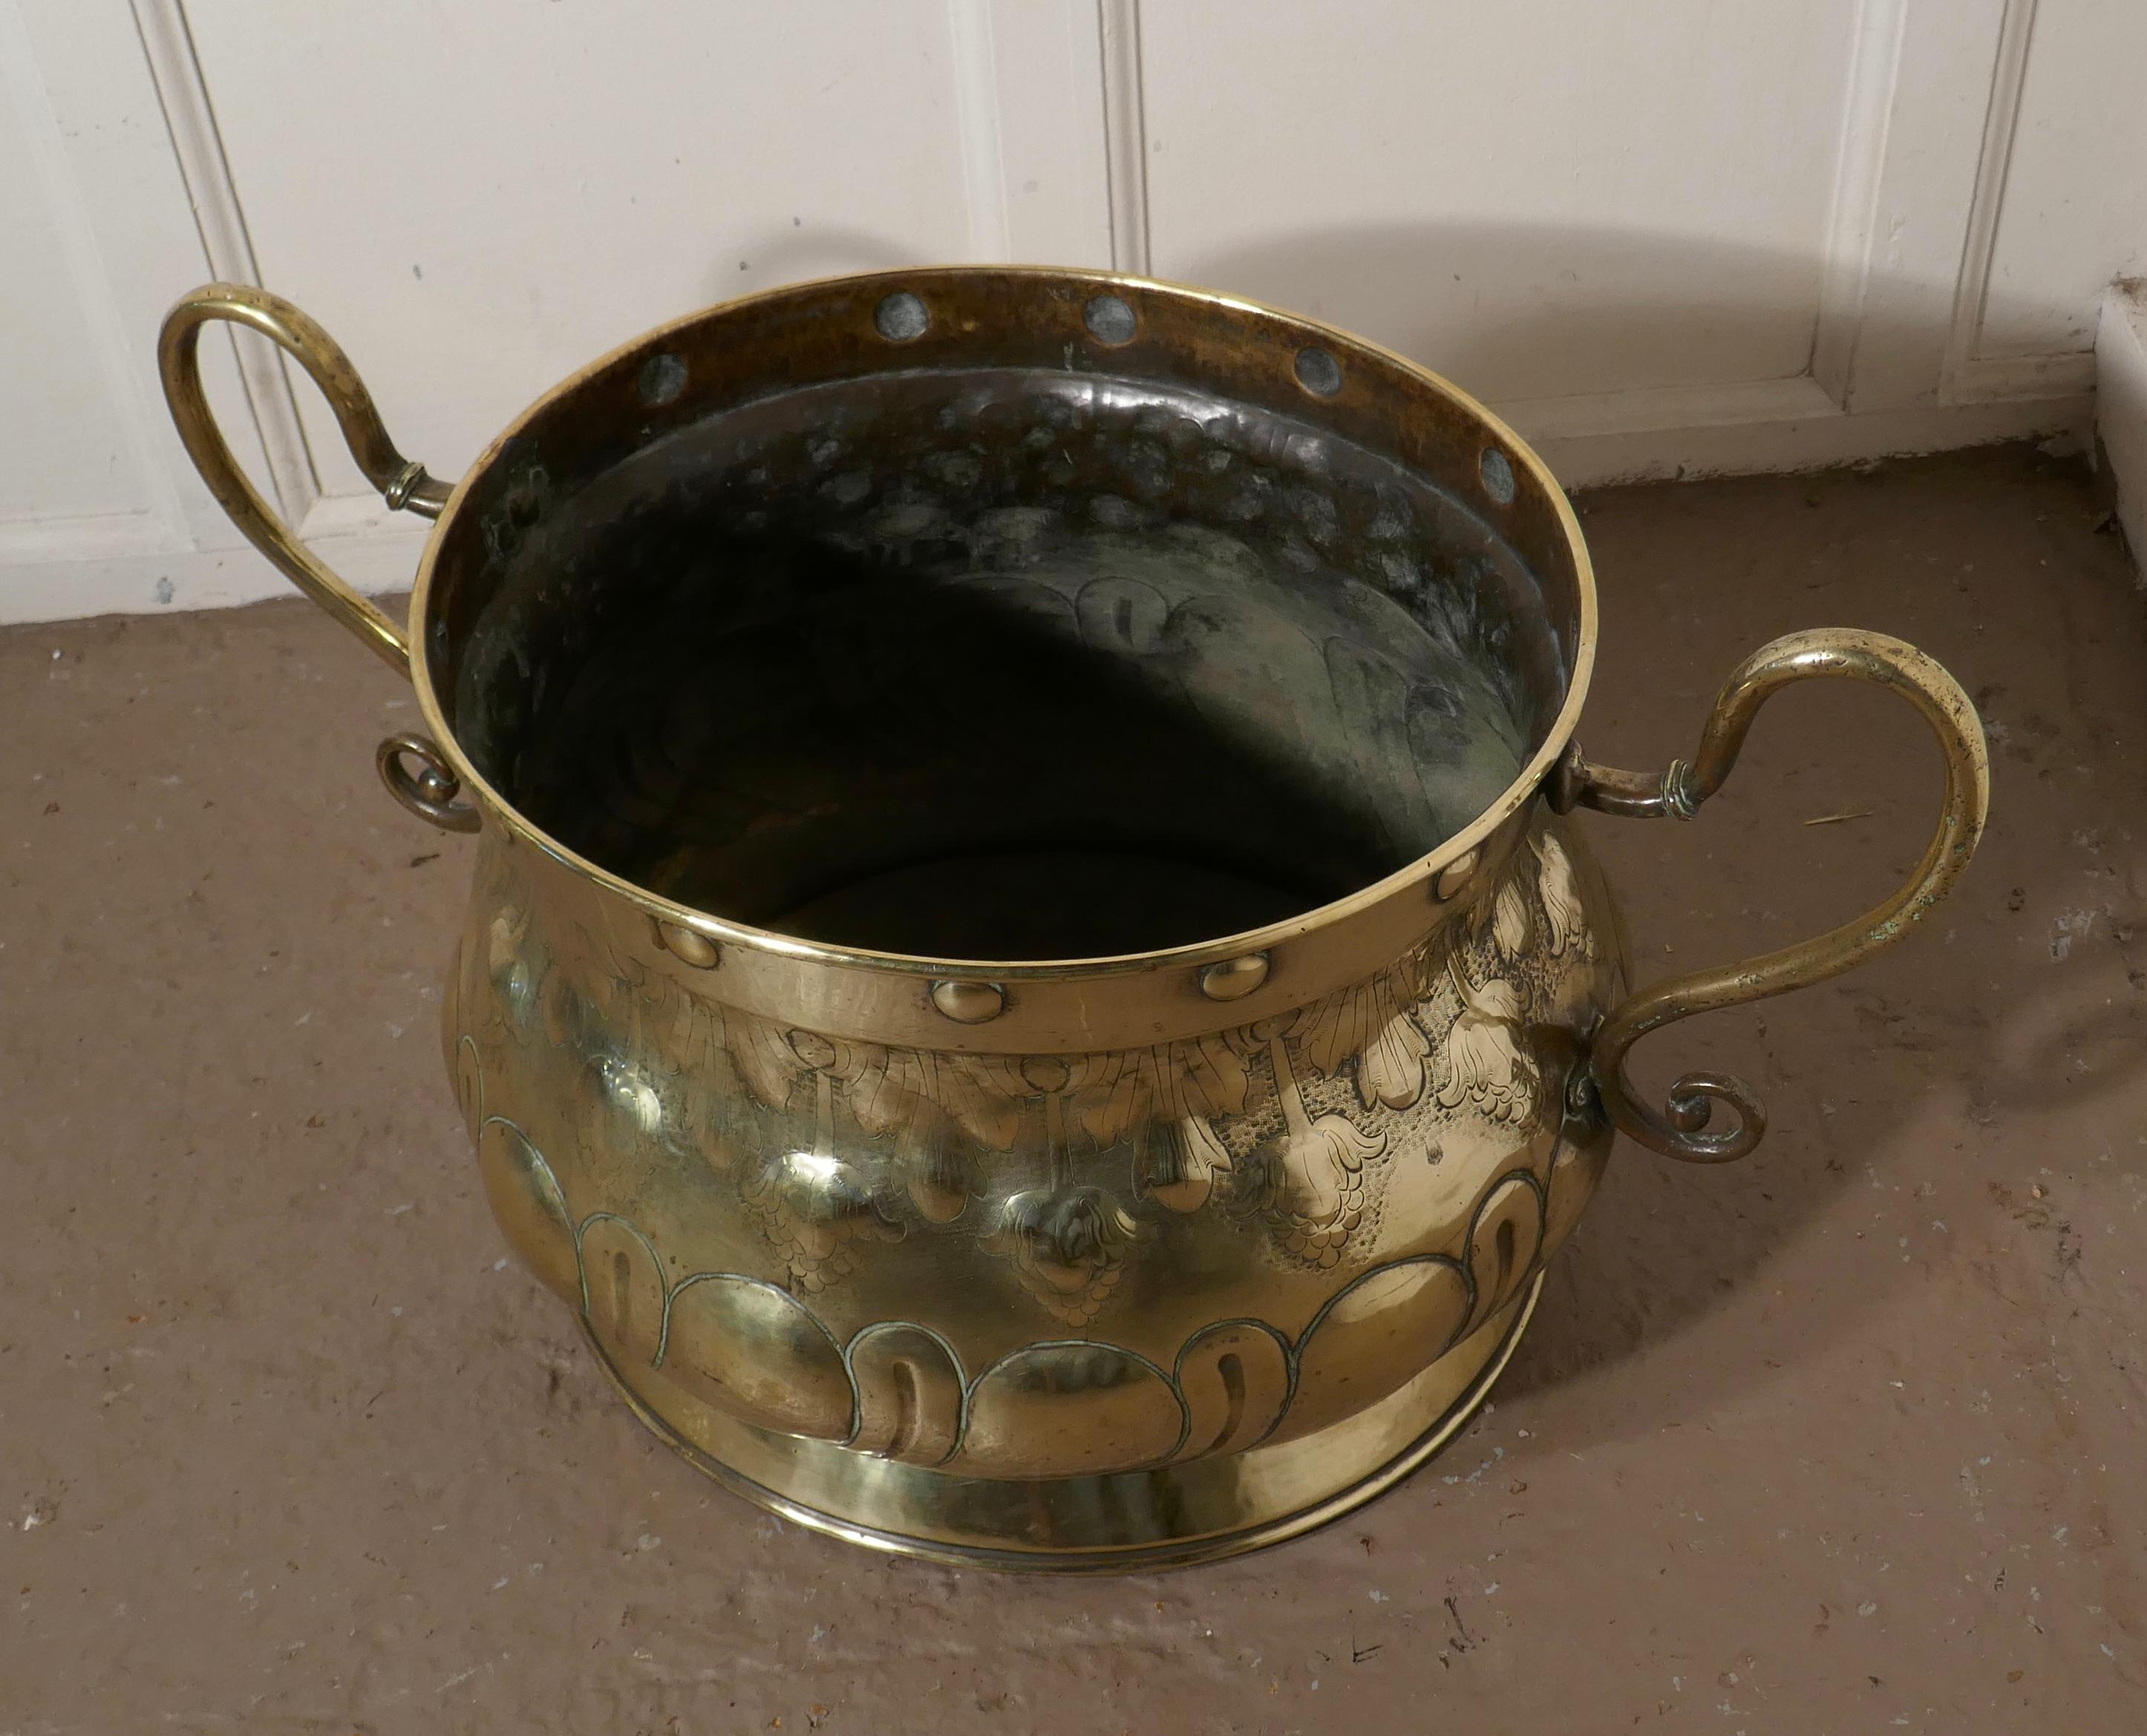 Very large Art Nouveau brass jardinière

A very large piece, big enough for the Christmas tree and a great looker
The pot id oval and is made in brass with a beaten Art Nouveau design, and huge san neck handle son each side
In very good